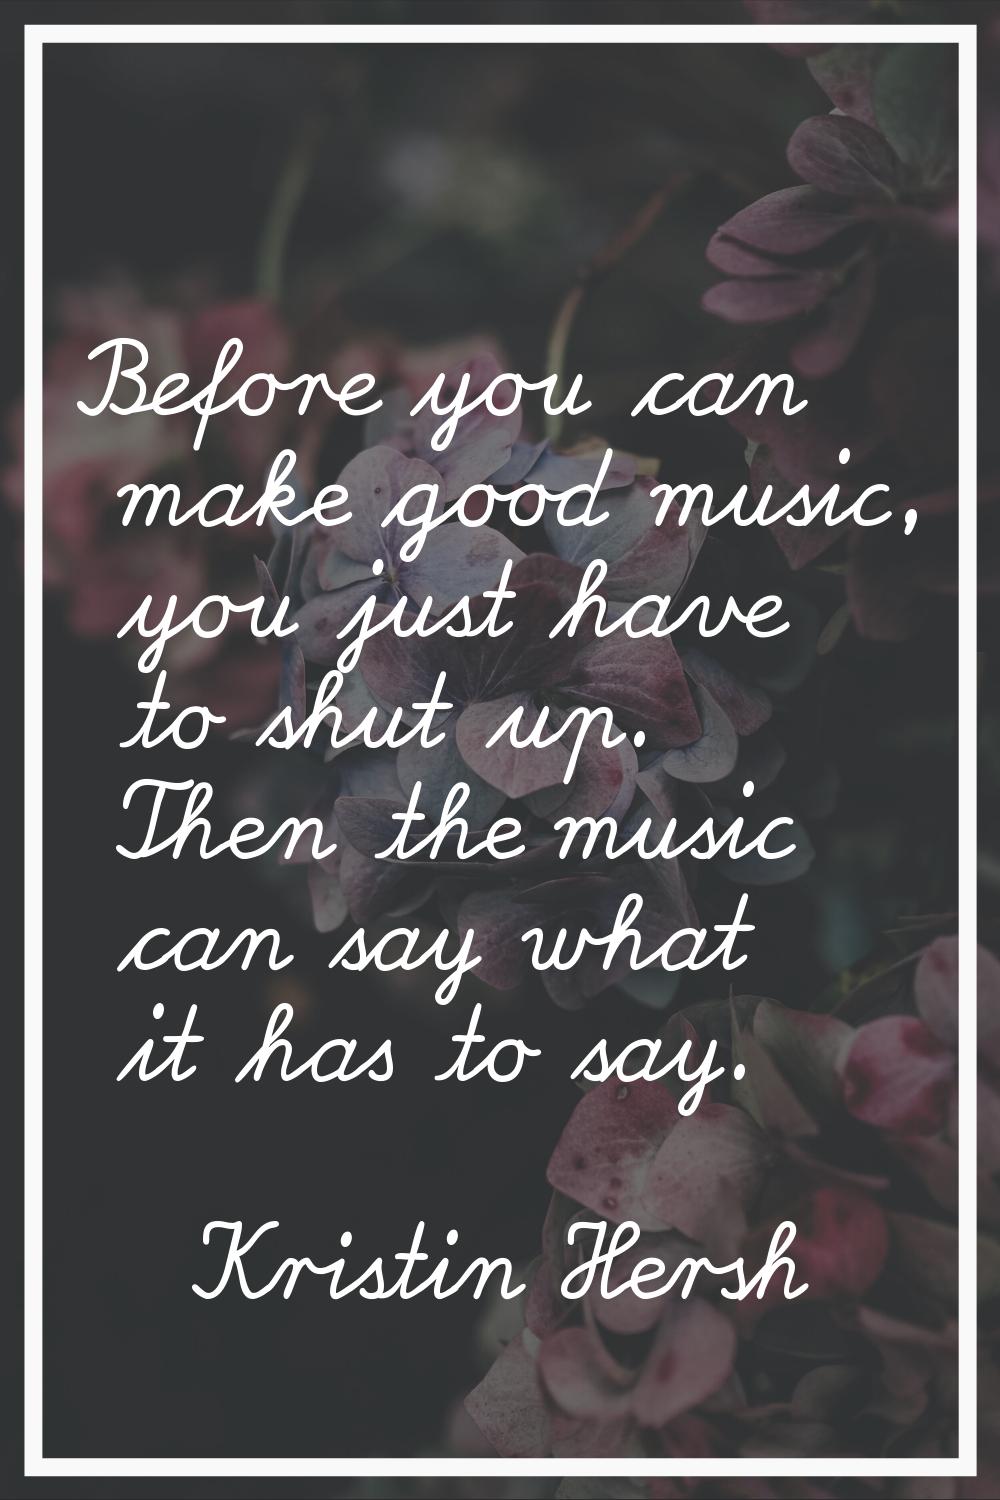 Before you can make good music, you just have to shut up. Then the music can say what it has to say